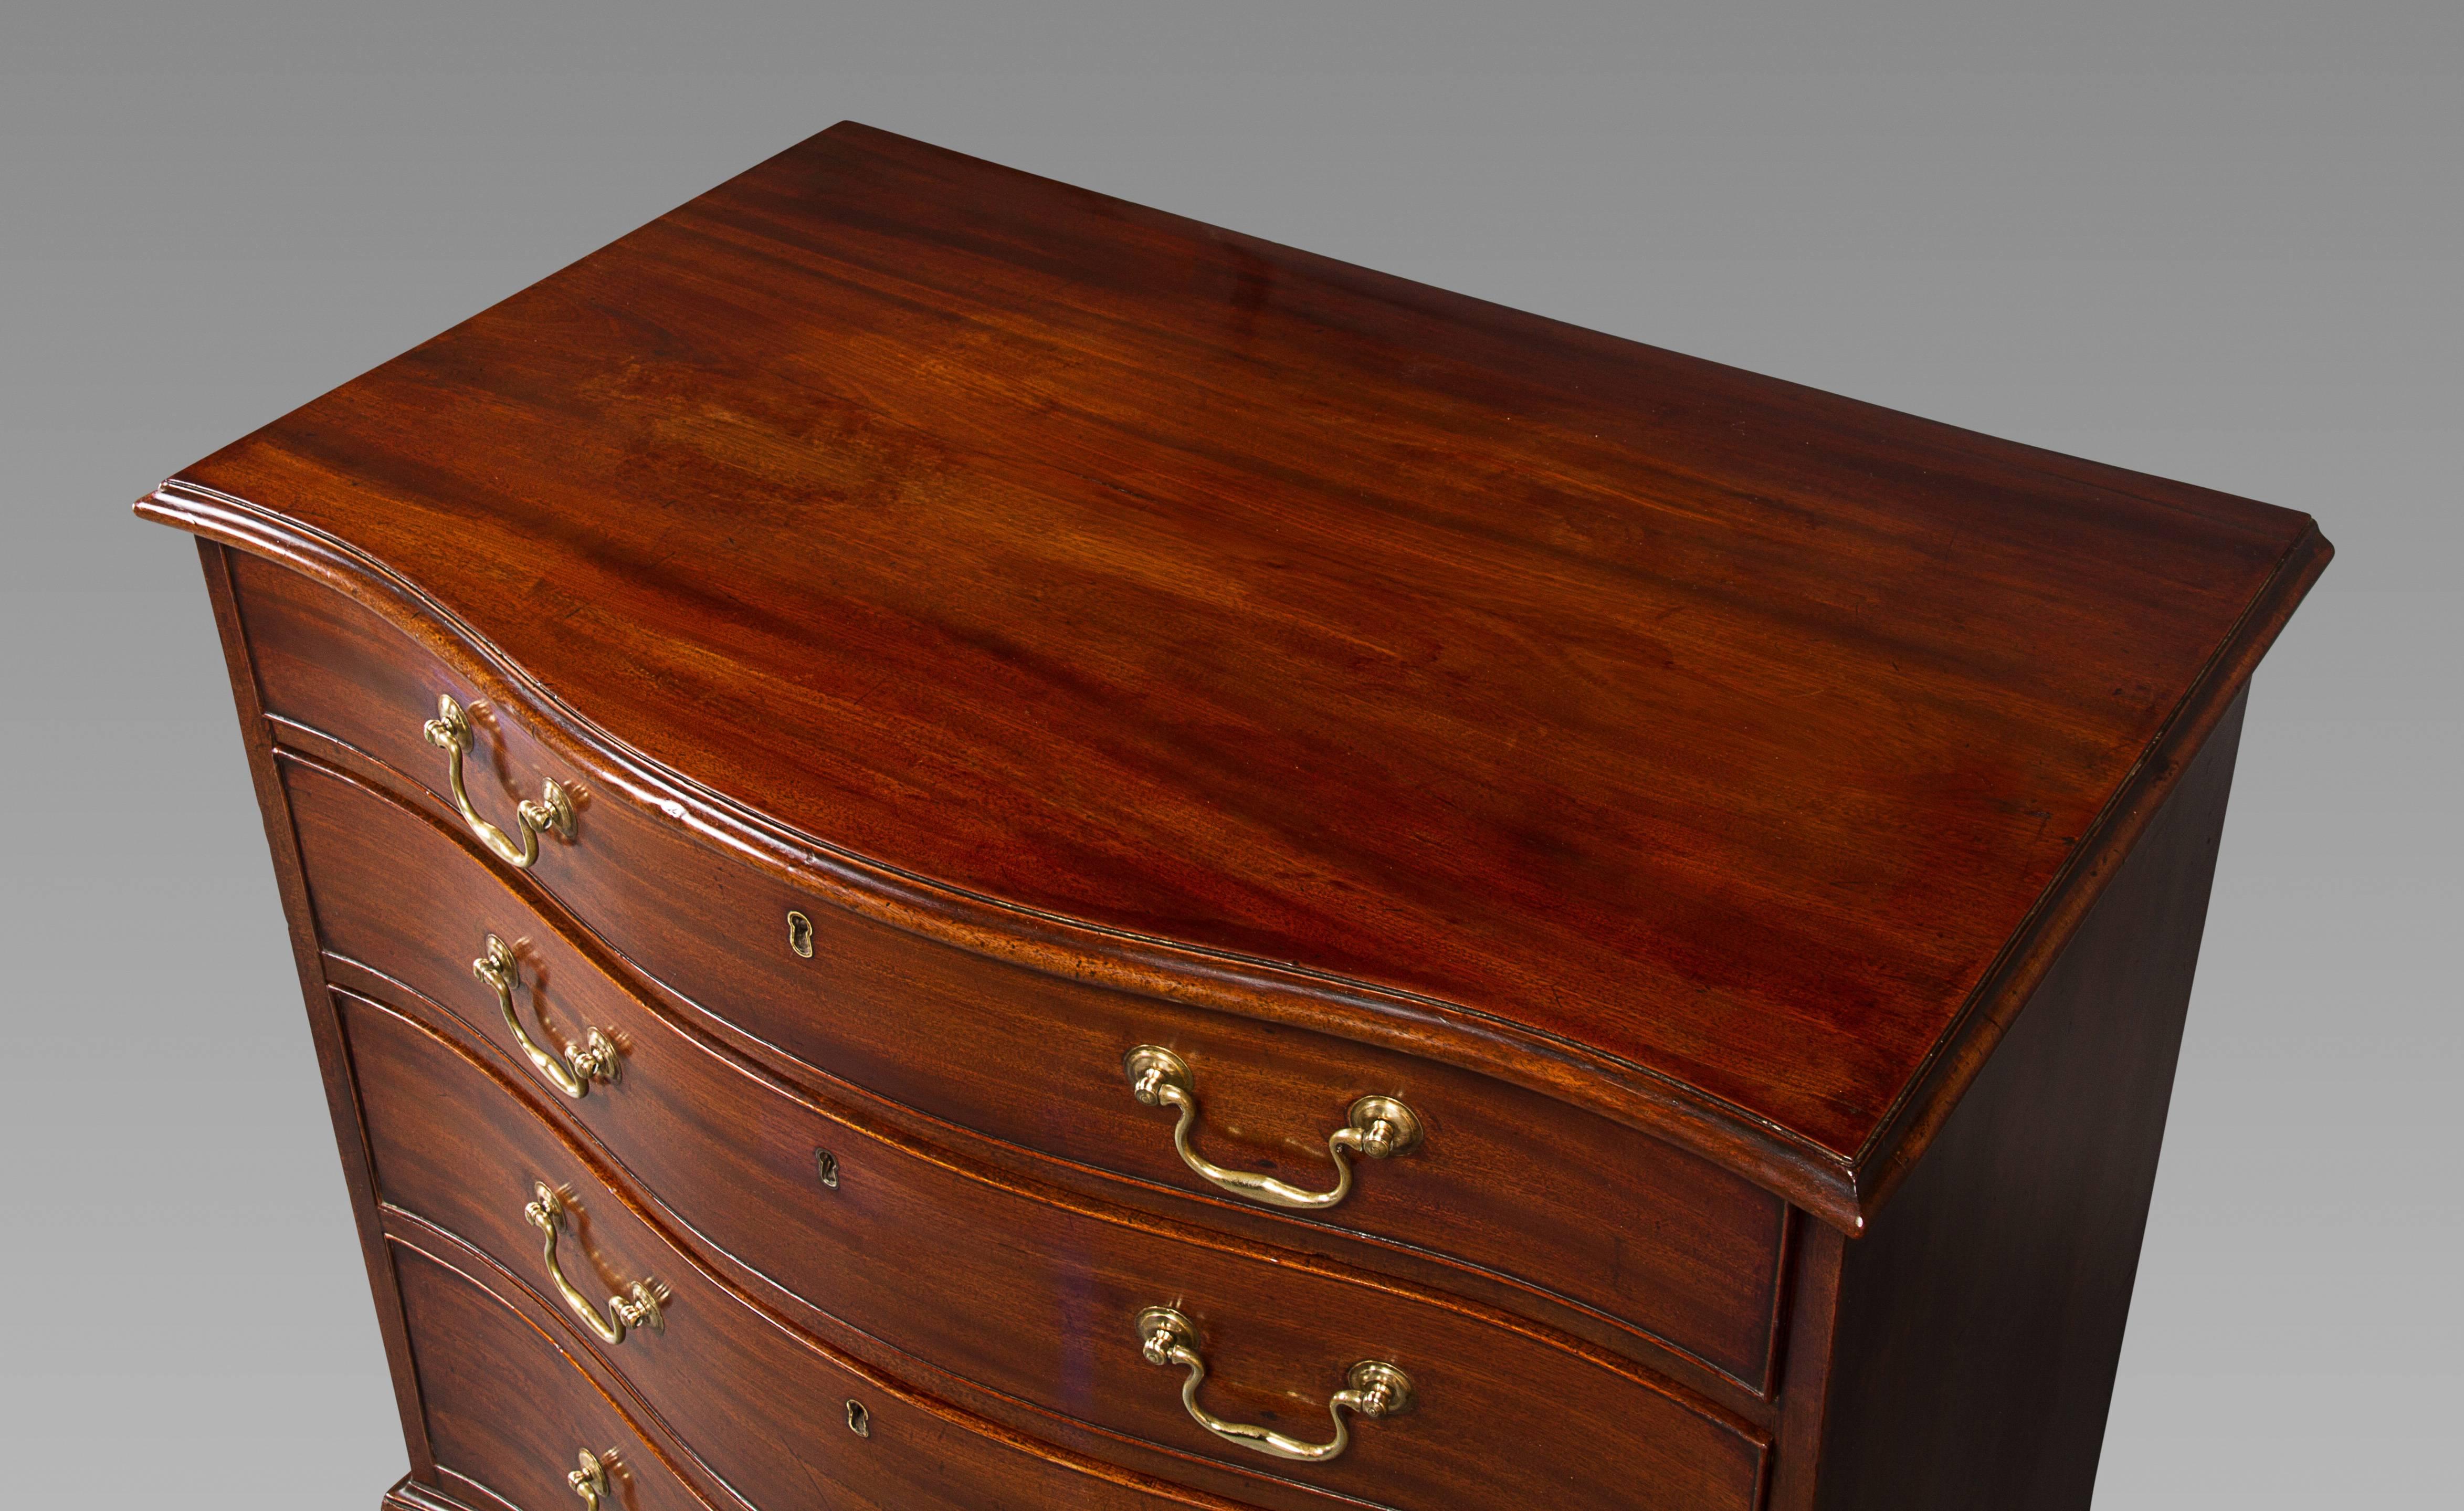 With a thumb molded serpentine top above a conforming case with four cockbeaded long drawers.
This chest, although simple, is of the finest quality in both timbers and construction. The drawer facings are solid mahogany, the underside is coated in